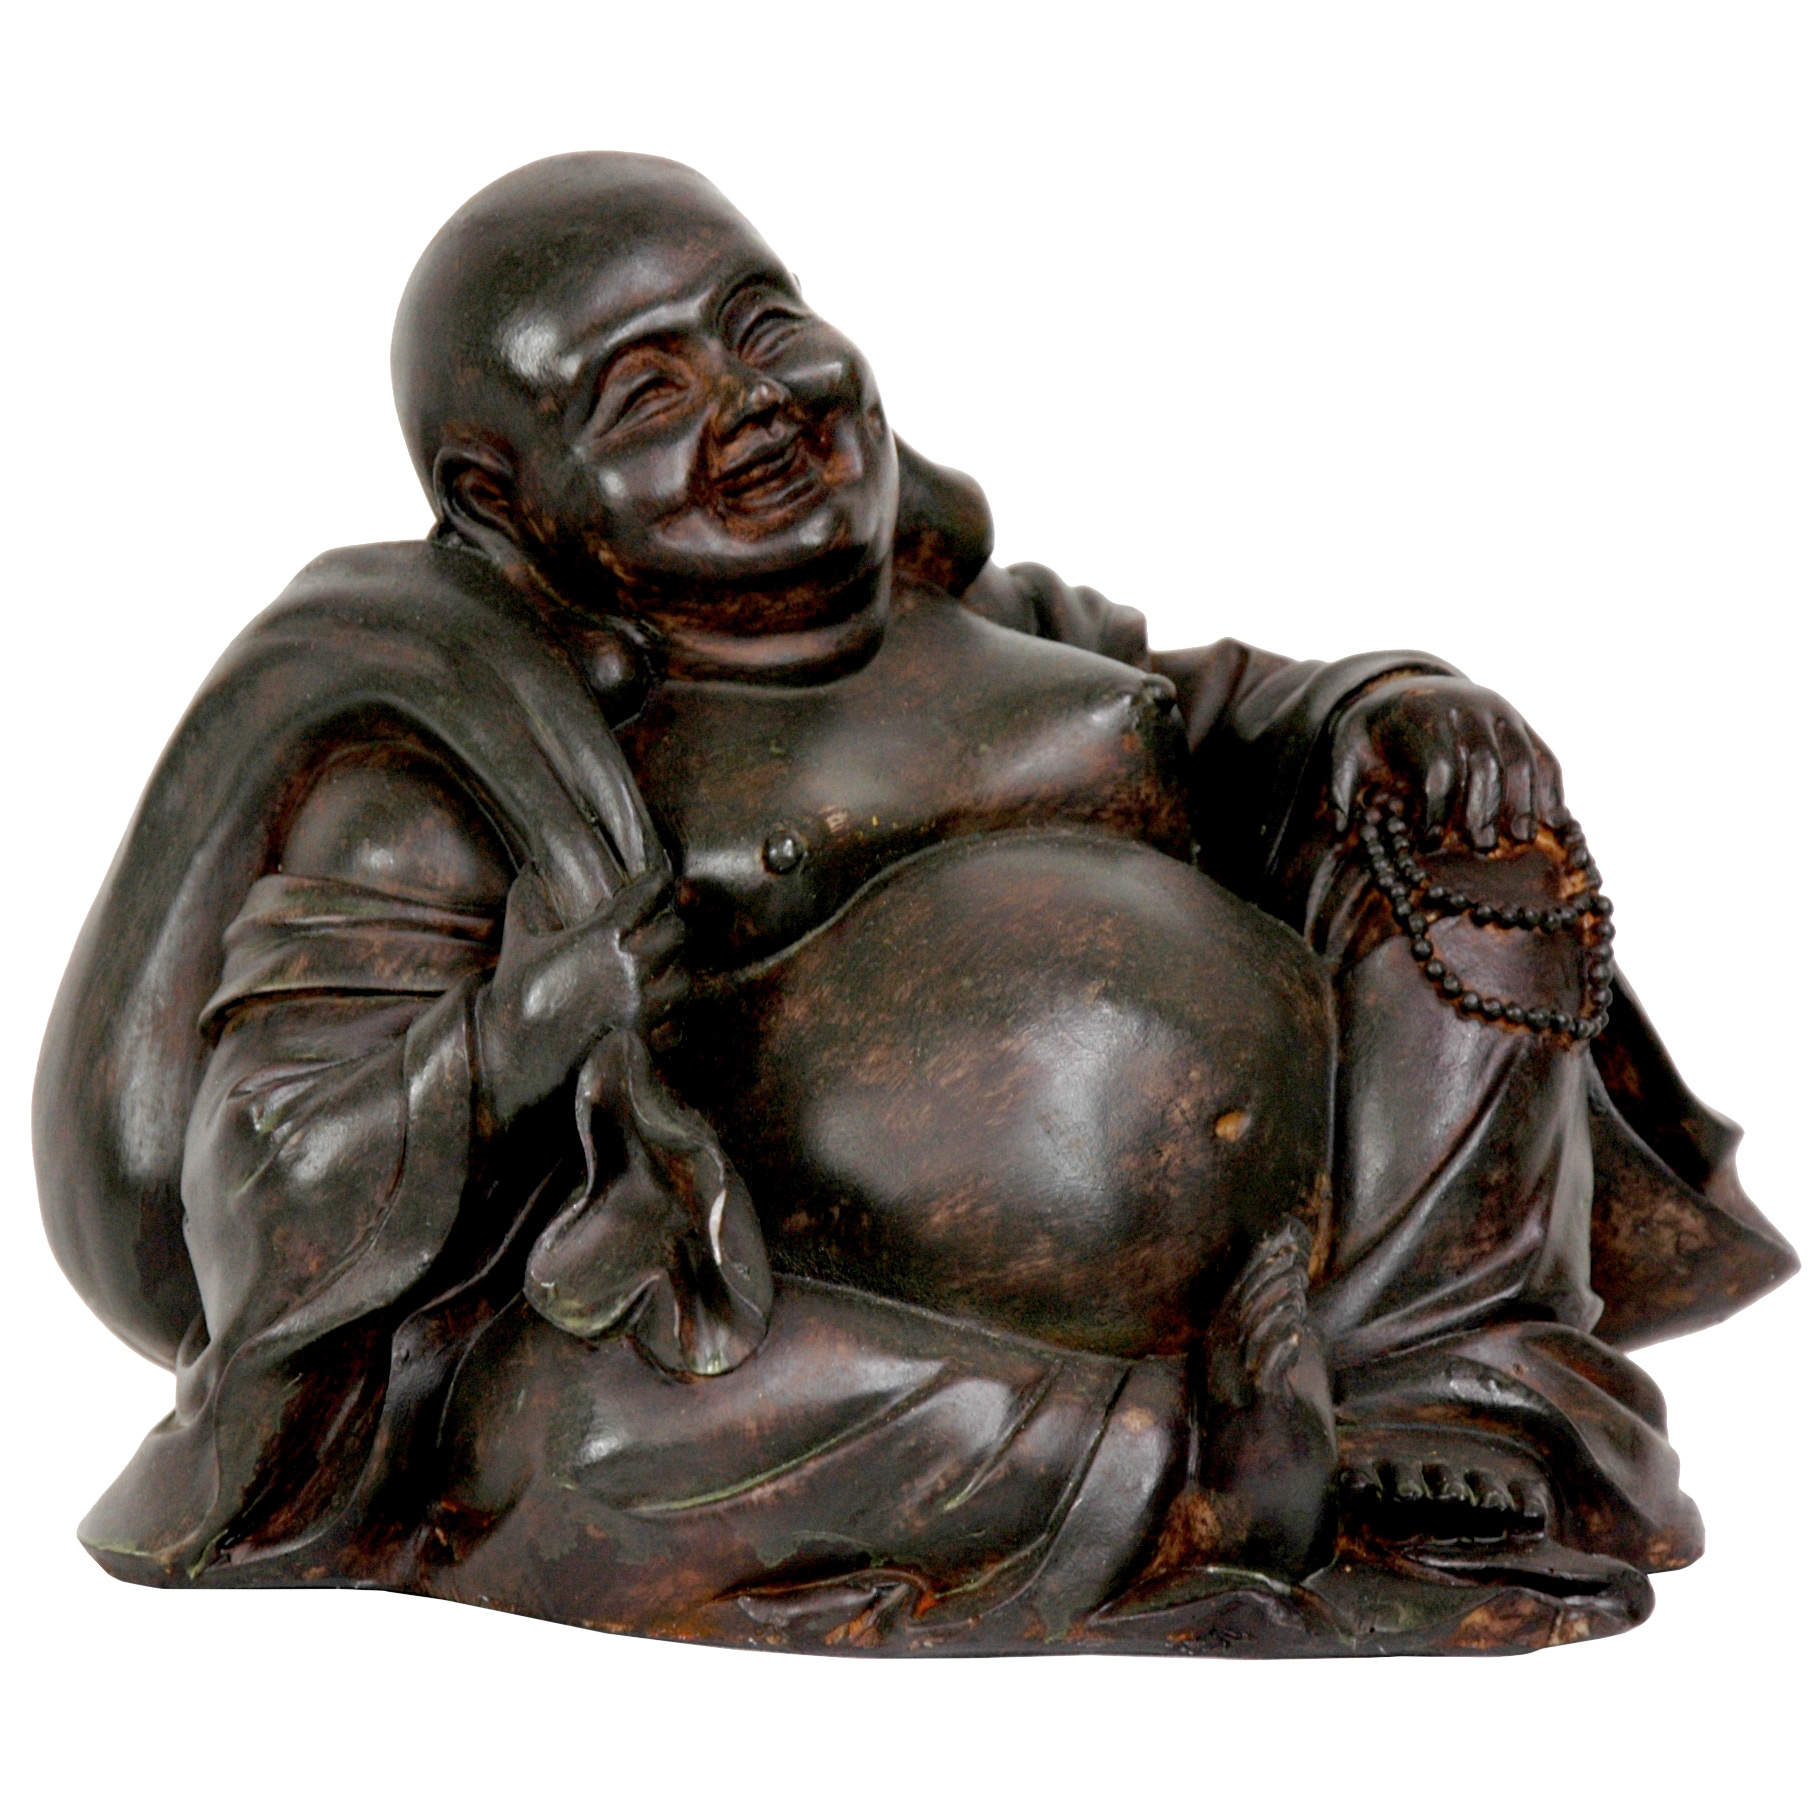 Buy Asian and Japanese Art Online - Statues & Figurines